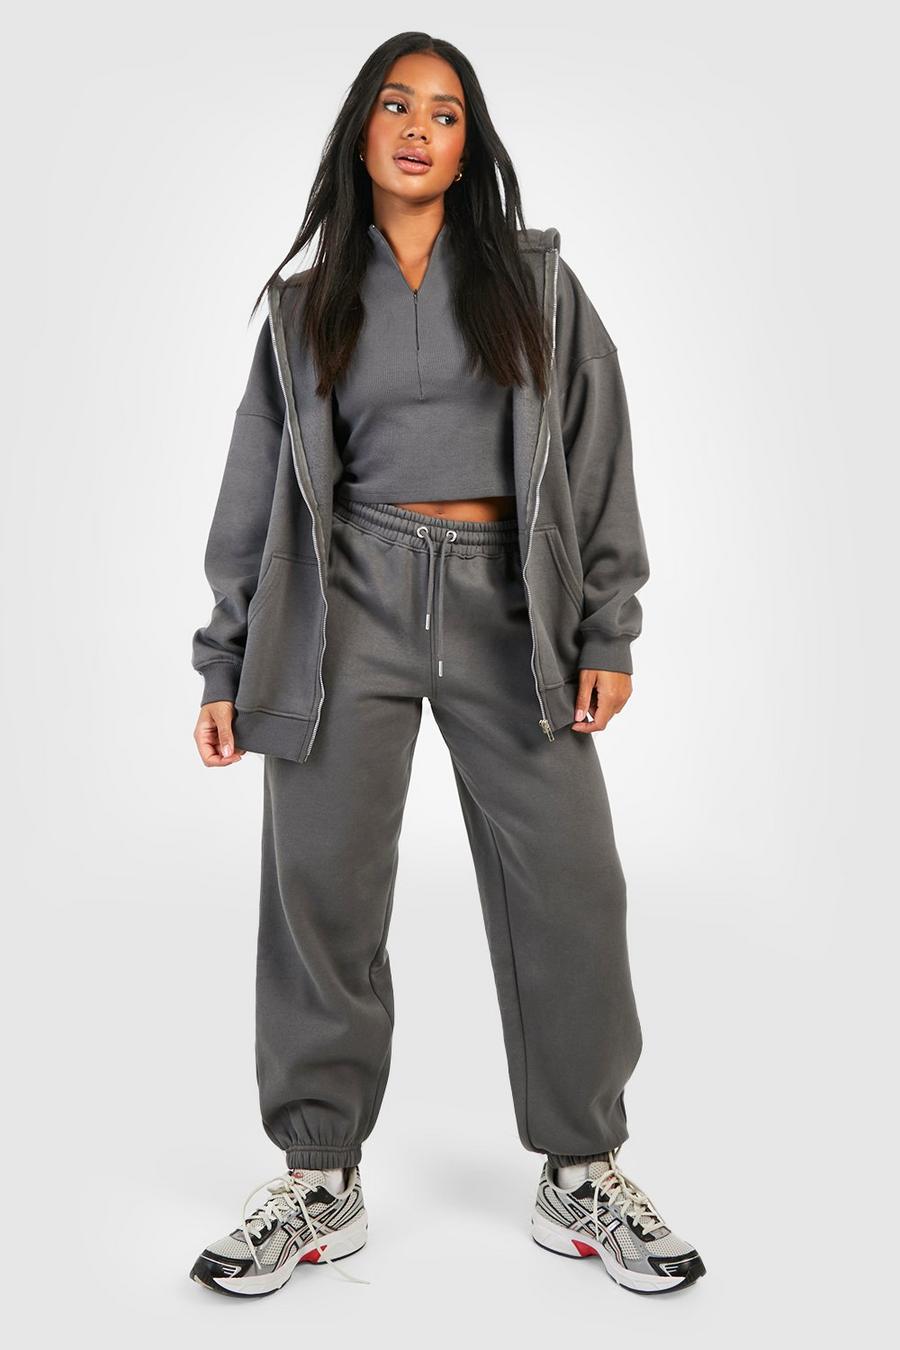 Charcoal Ribbed Zip Crop Top 3 Piece Hooded Tracksuit